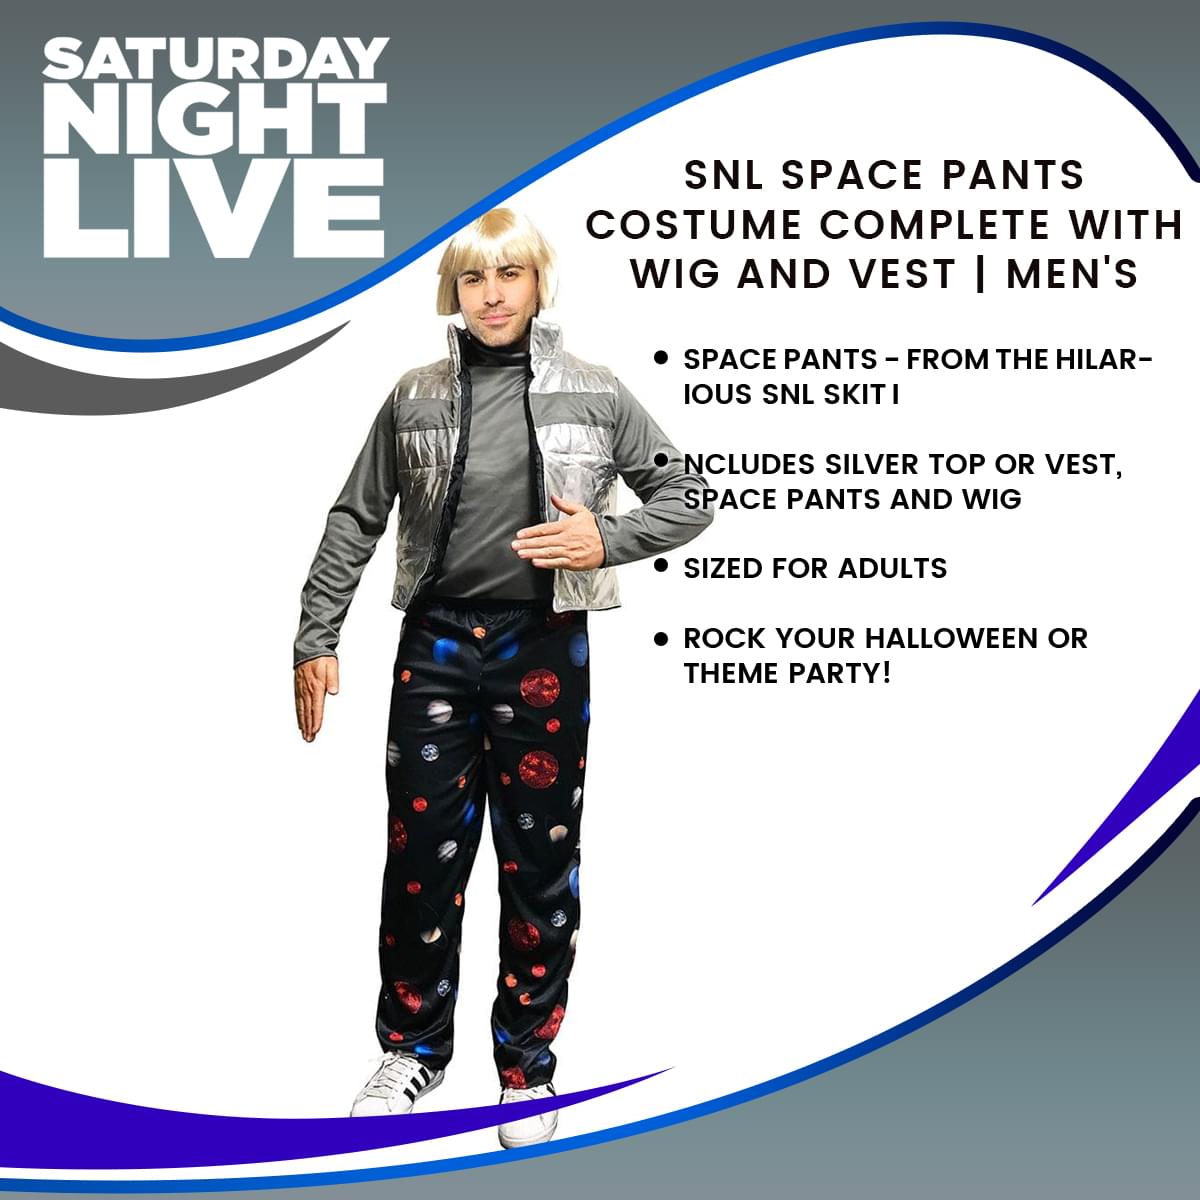 SNL Space Pants Costume Complete with Wig and Vest | Men's